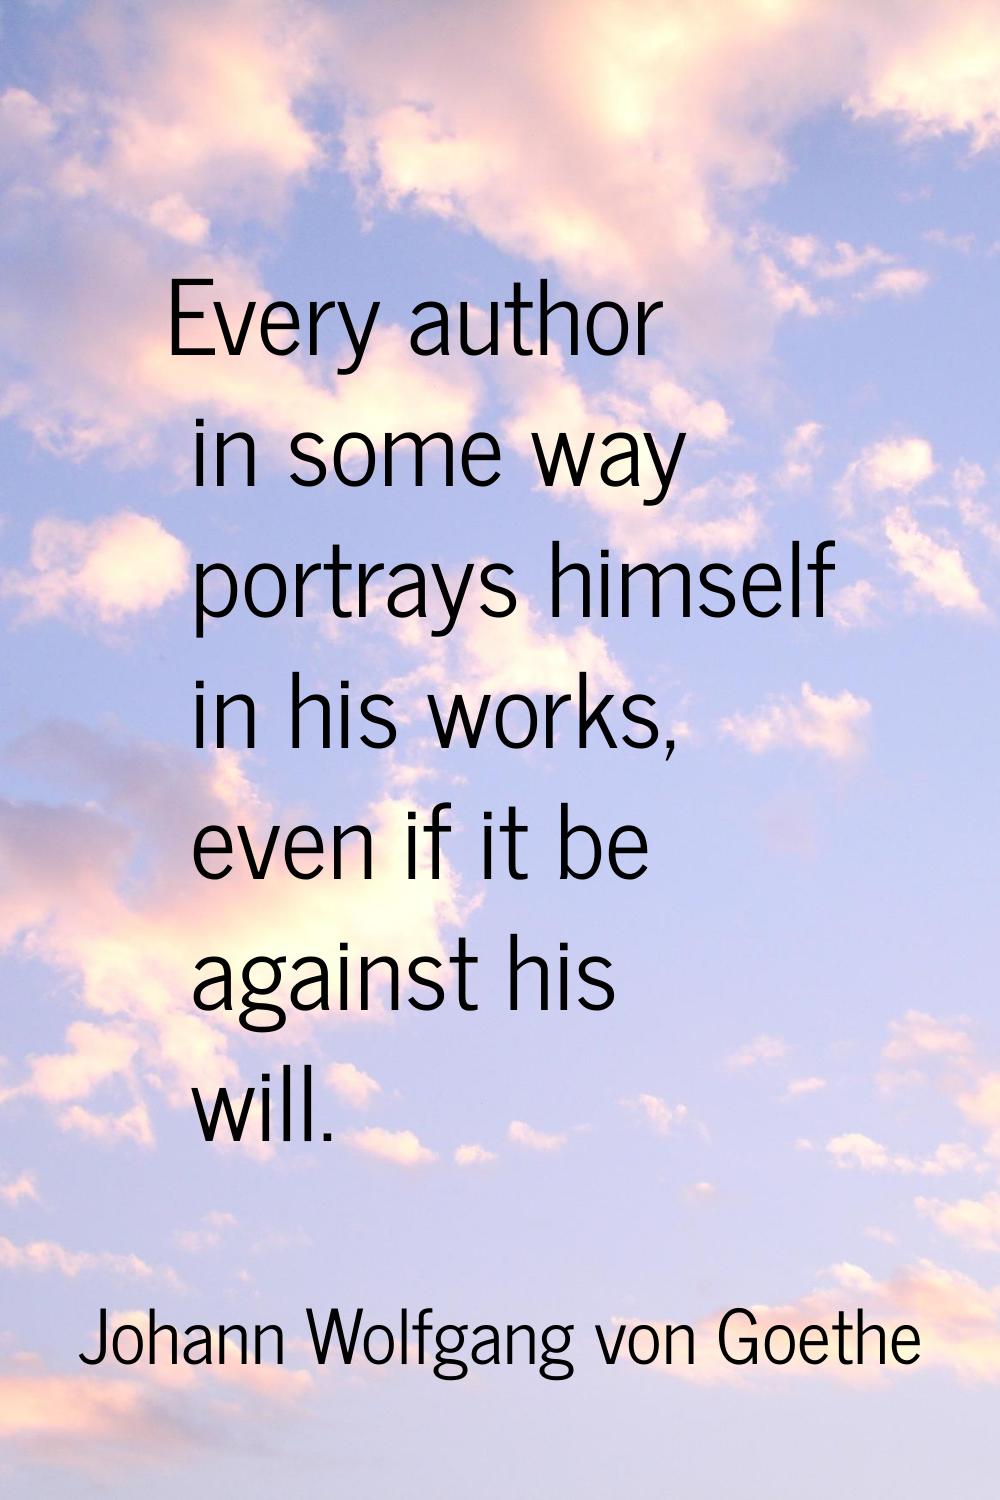 Every author in some way portrays himself in his works, even if it be against his will.